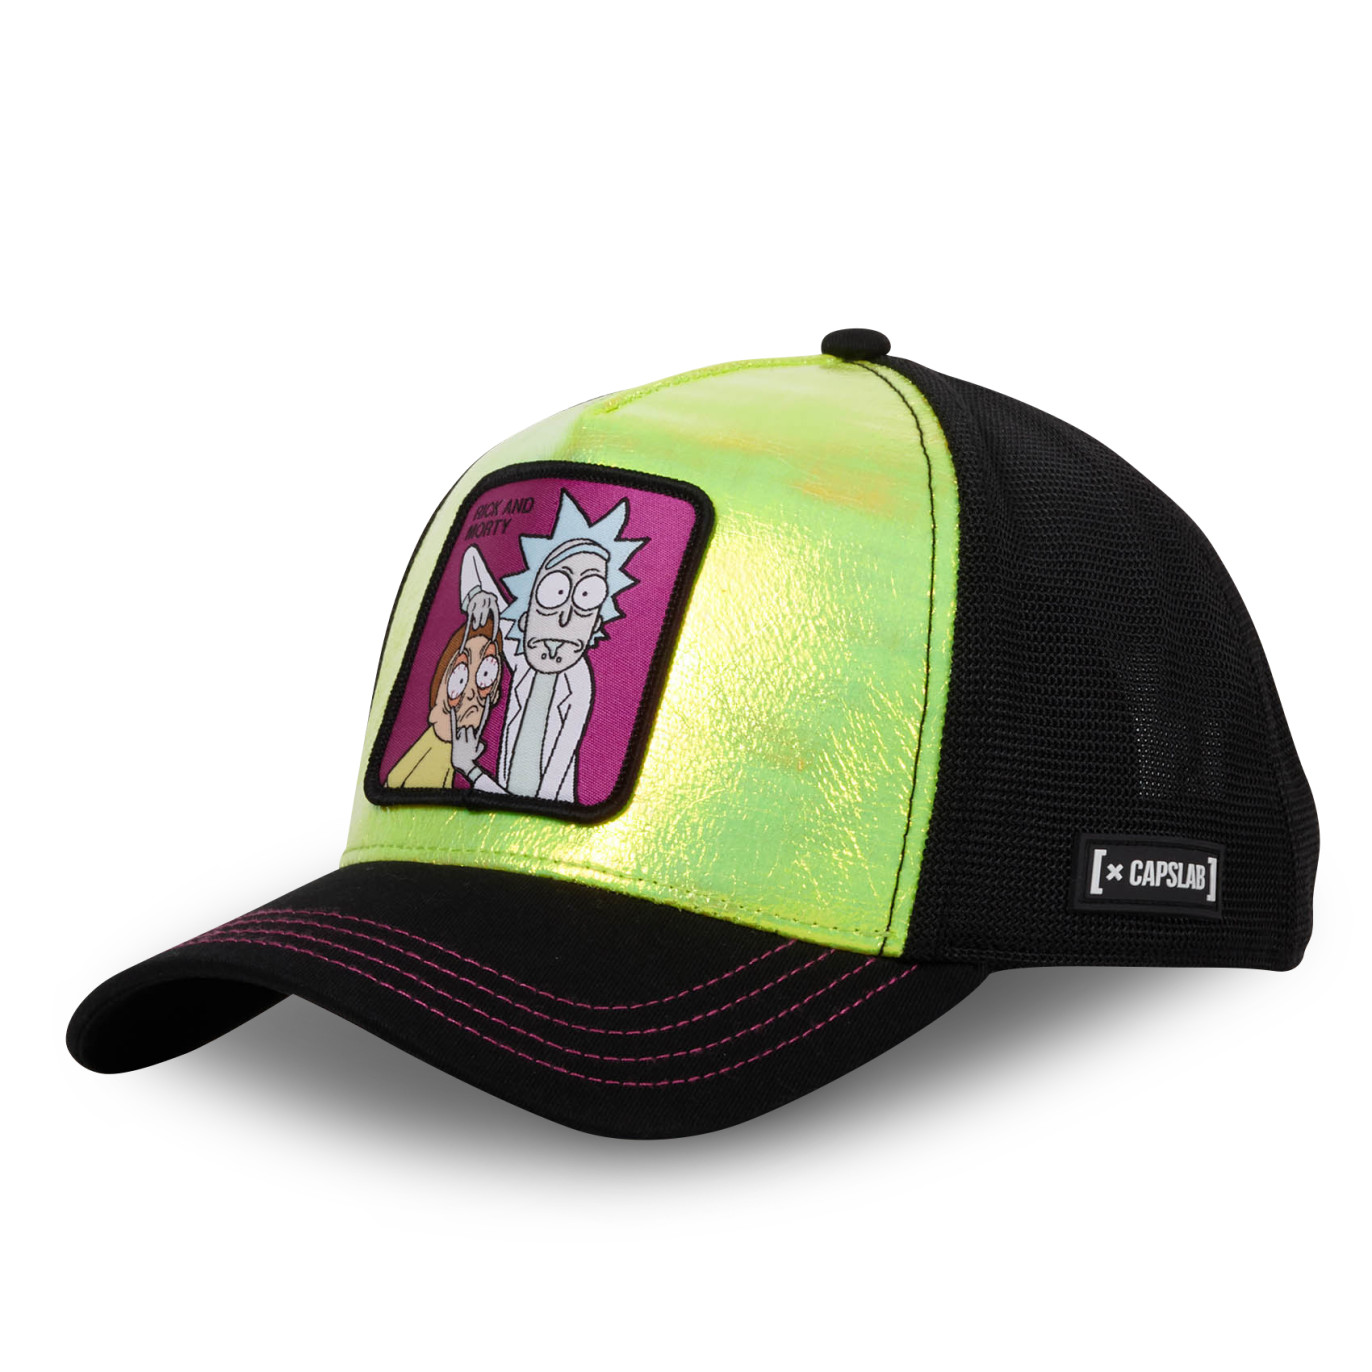 Casquette homme trucker Rick and Morty Capslab Capslab - 1